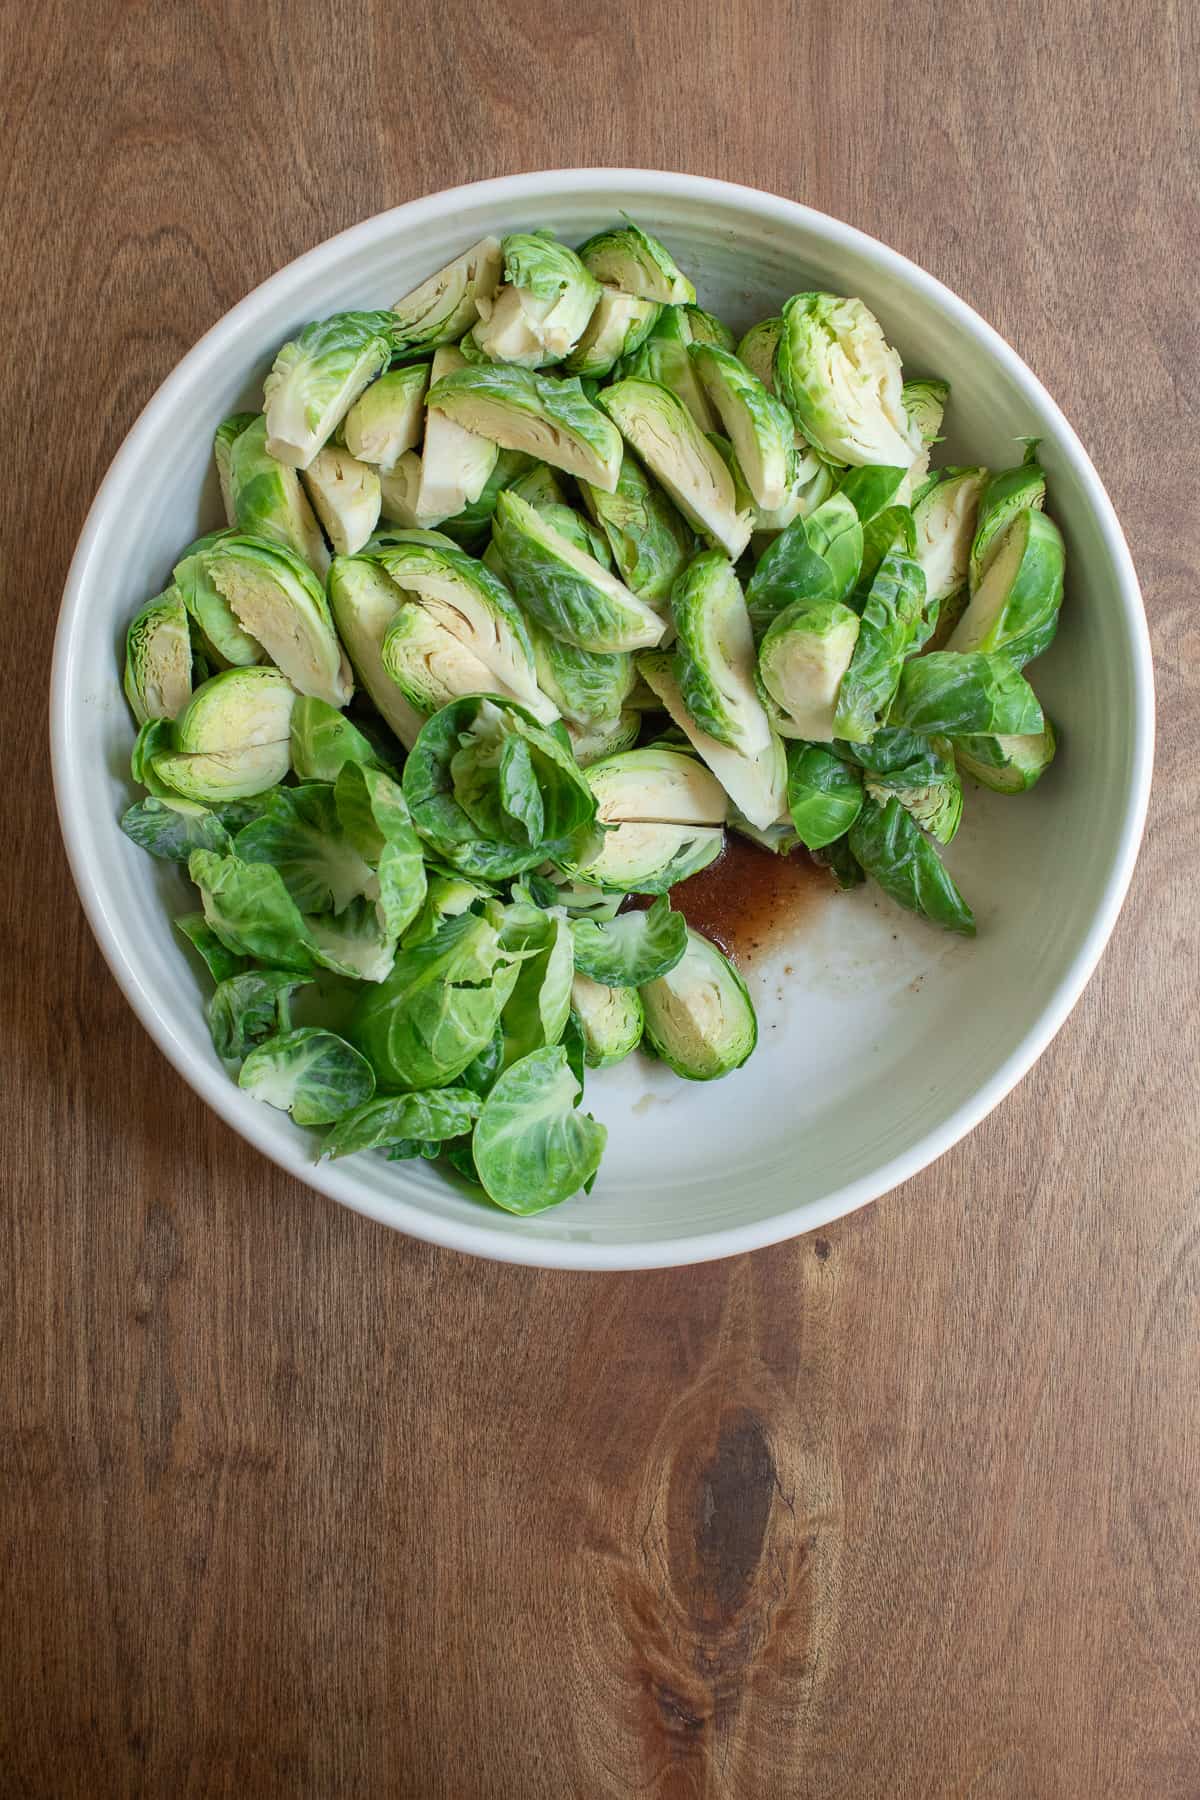 The trimmed brussel sprouts sit in a large white bowl with the glaze mixture at the bottom.